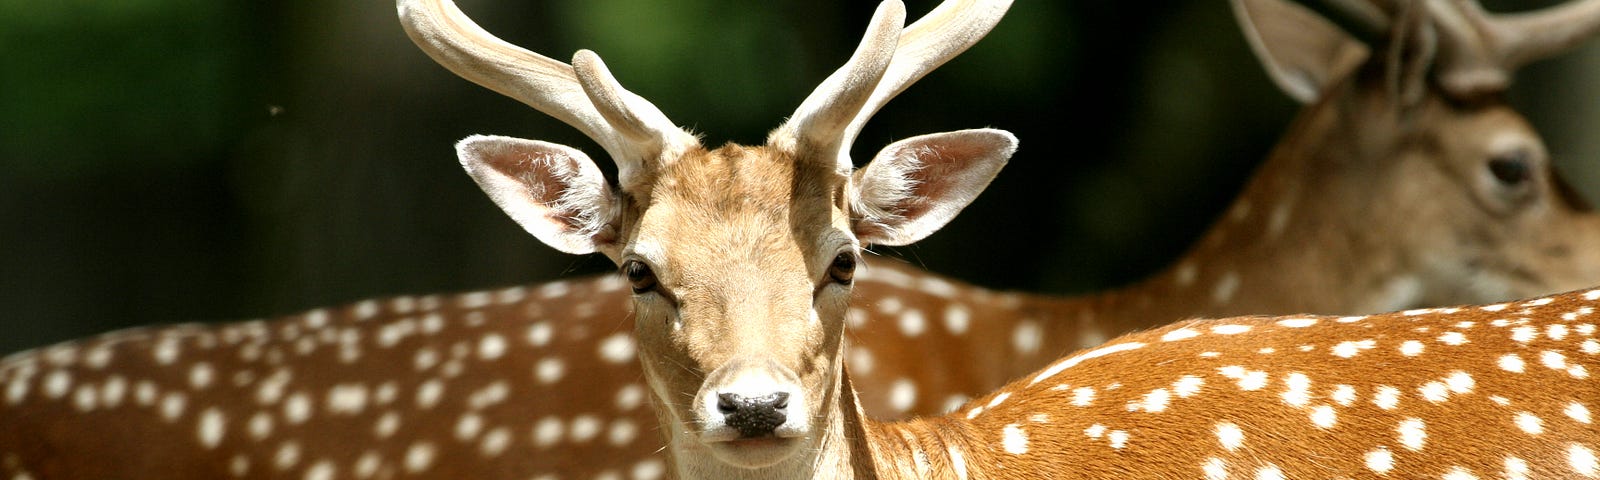 The face of a deer with other deer in the background.